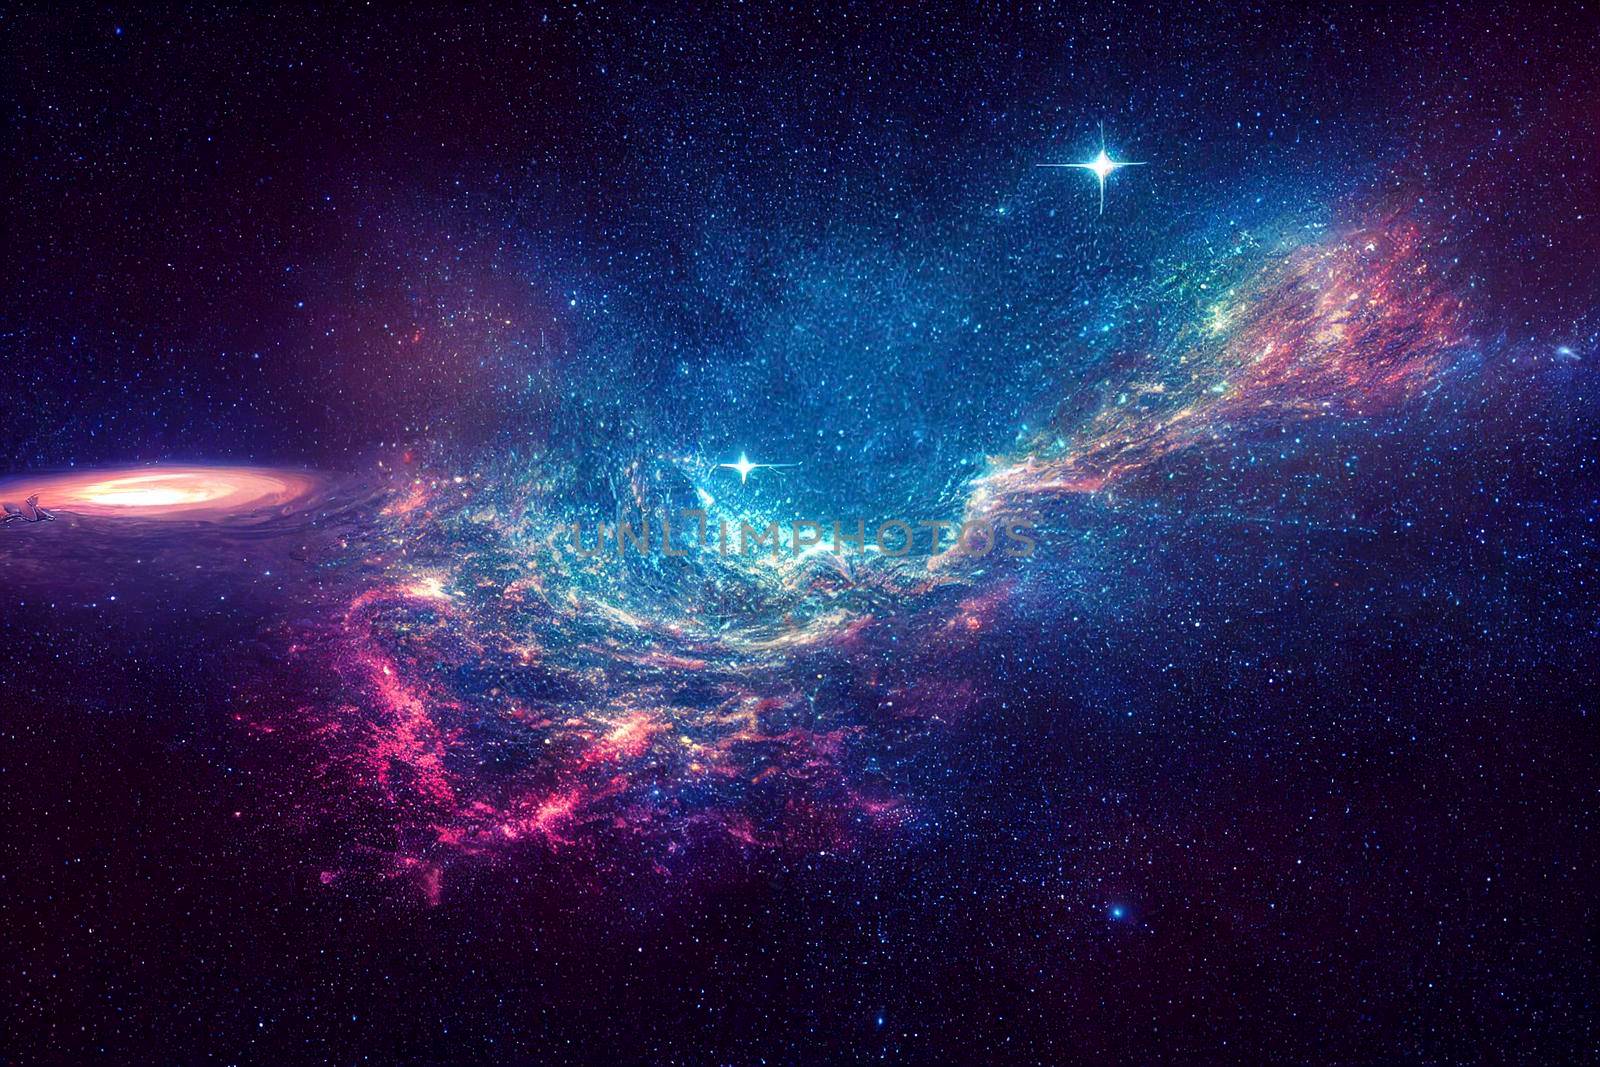 Cosmic landscape, colorful science fiction wallpaper with endless outer space